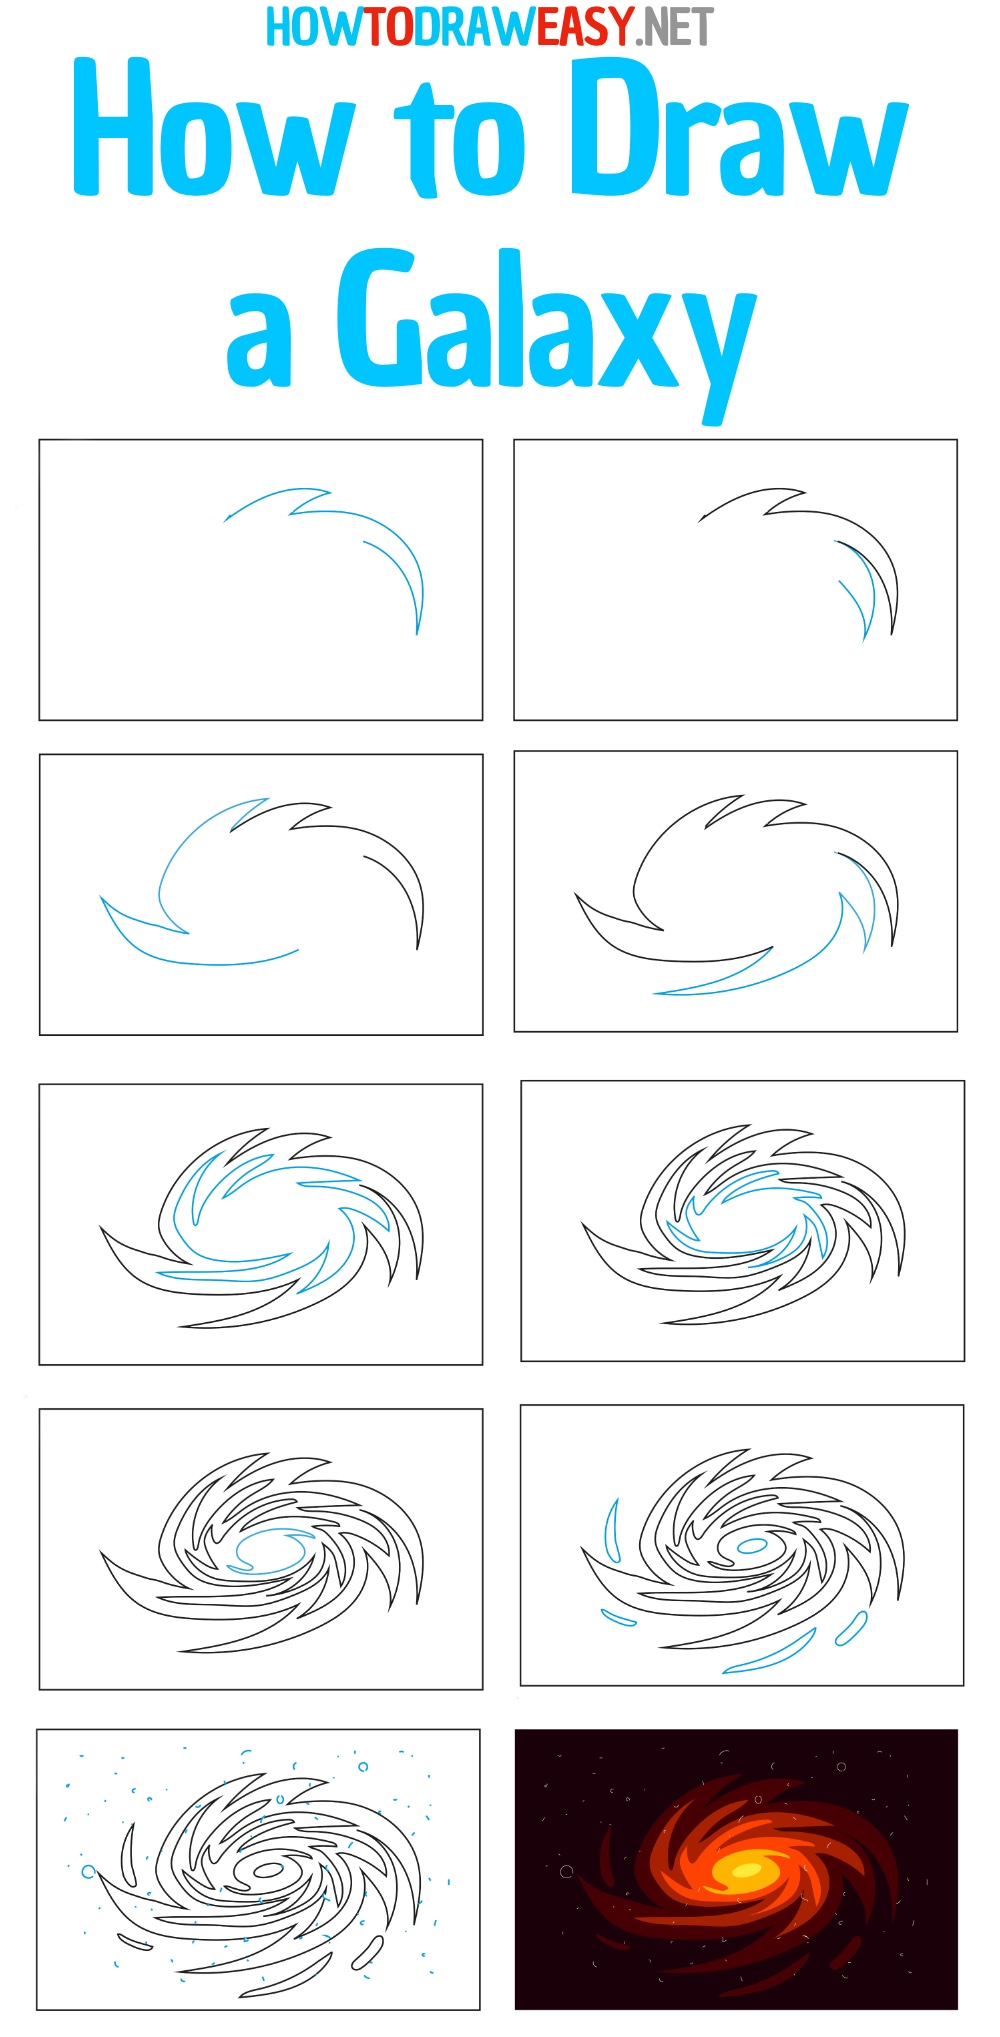 How to Draw a Galaxy Step by Step